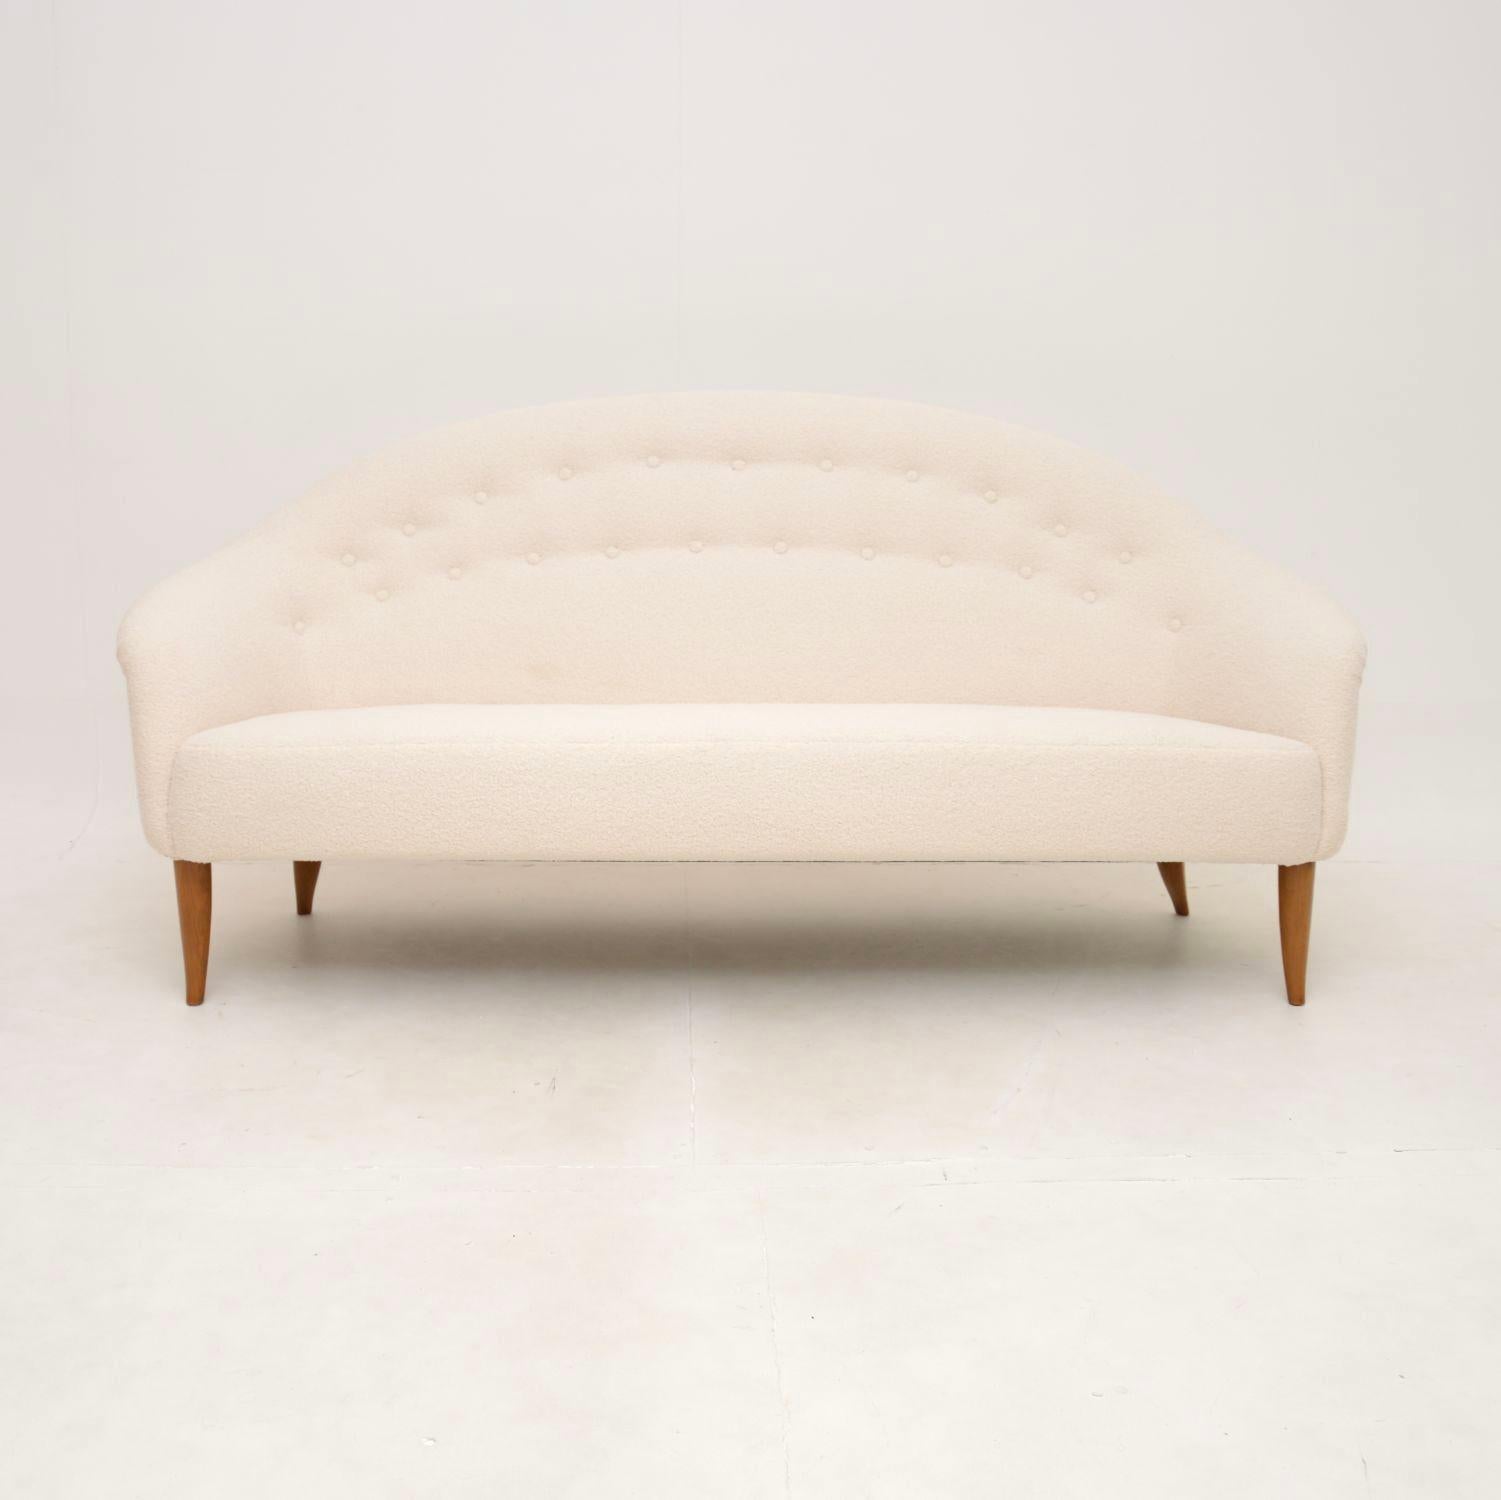 A beautiful and iconic vintage sofa ‘Paradiset’ by Kerstin Horlin Holmquist. This was made in Sweden, it dates from the 1960’s.

It has a stunning design and is of amazing quality. This is very comfortable as well as extremely stylish.

This is in